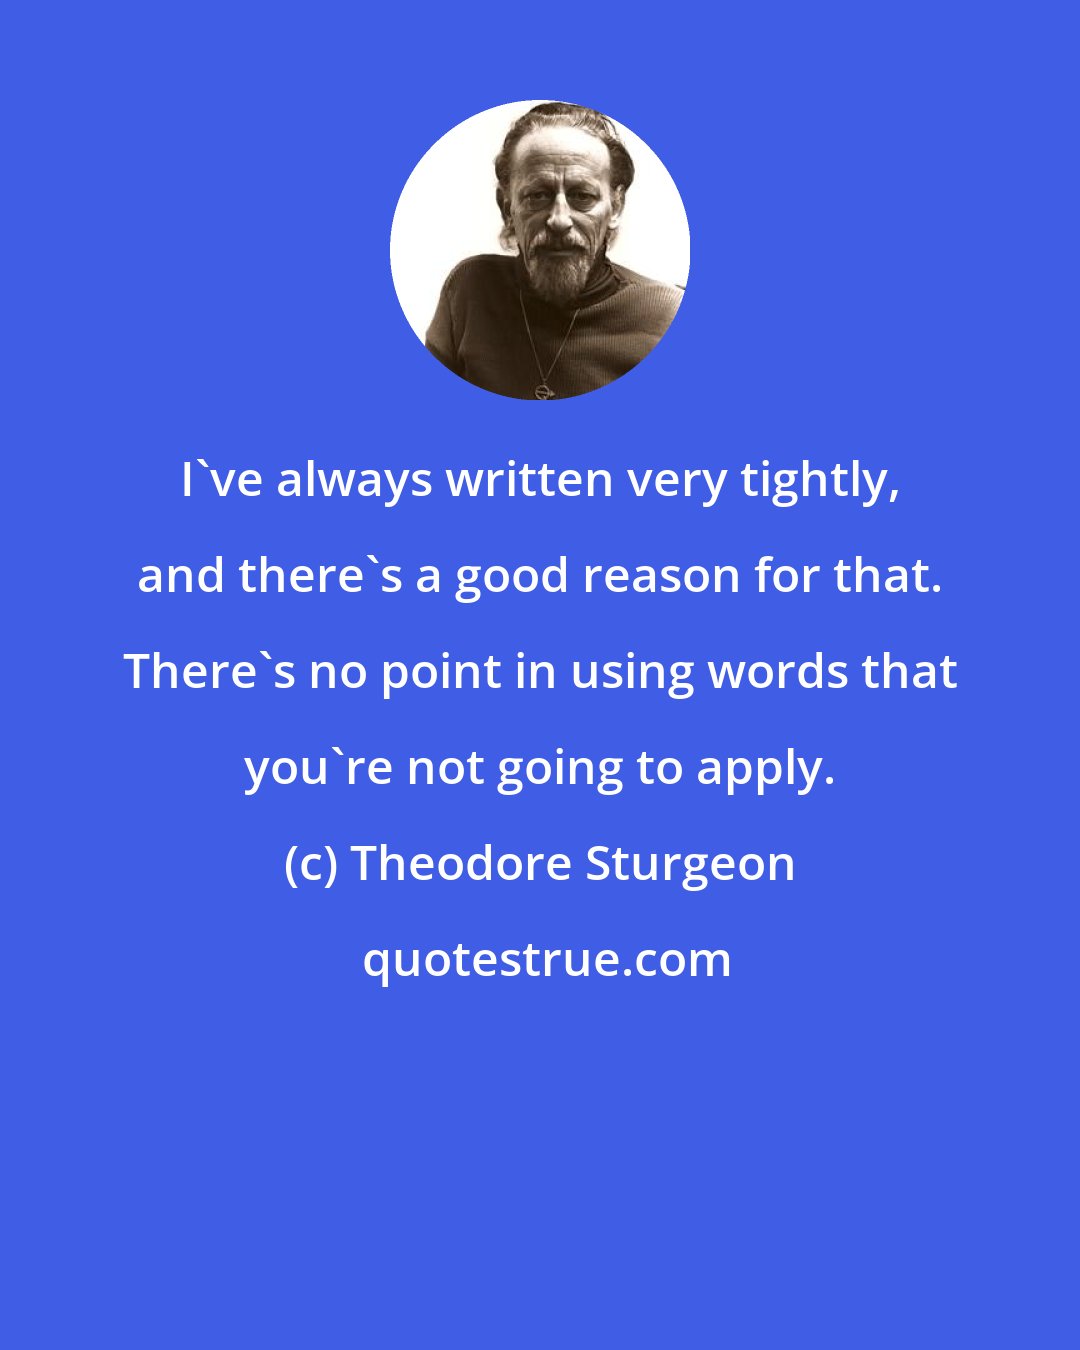 Theodore Sturgeon: I've always written very tightly, and there's a good reason for that. There's no point in using words that you're not going to apply.